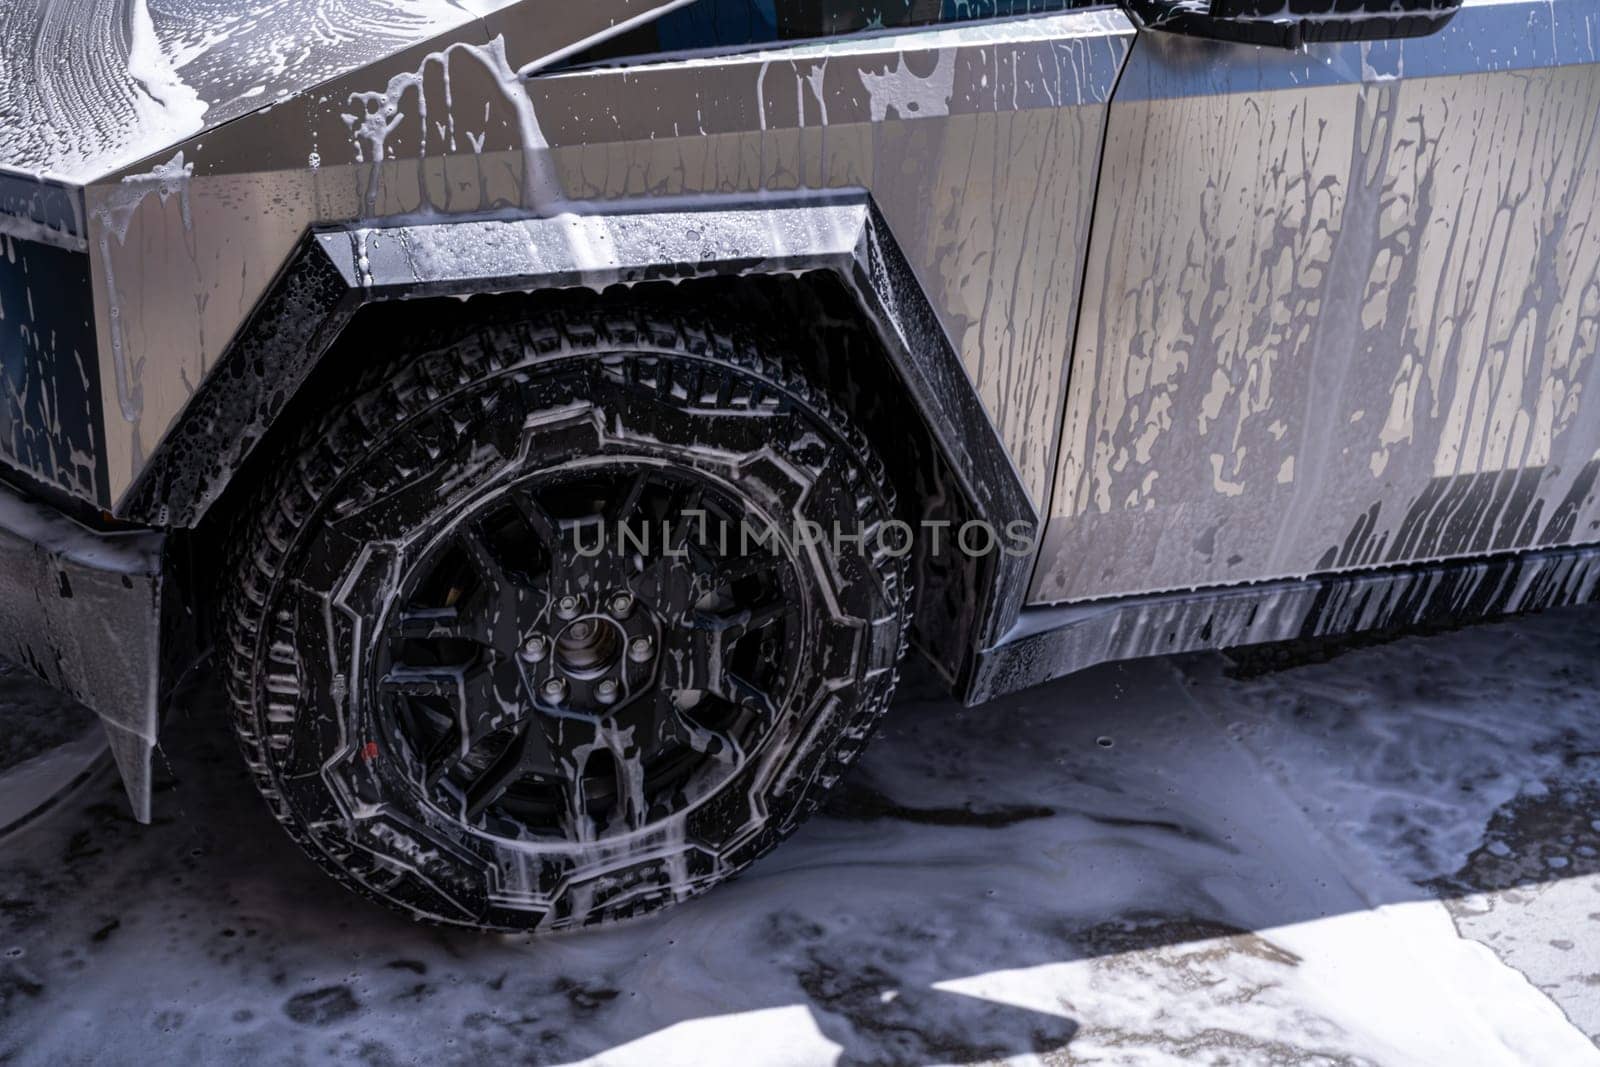 Denver, Colorado, USA-May 5, 2024-Close-up image of a Tesla Cybertruck being washed, showcasing the vehicle angular design and rugged tires. Water and soap suds cover the metallic surface, highlighting the unique texture and design elements of the electric truck.